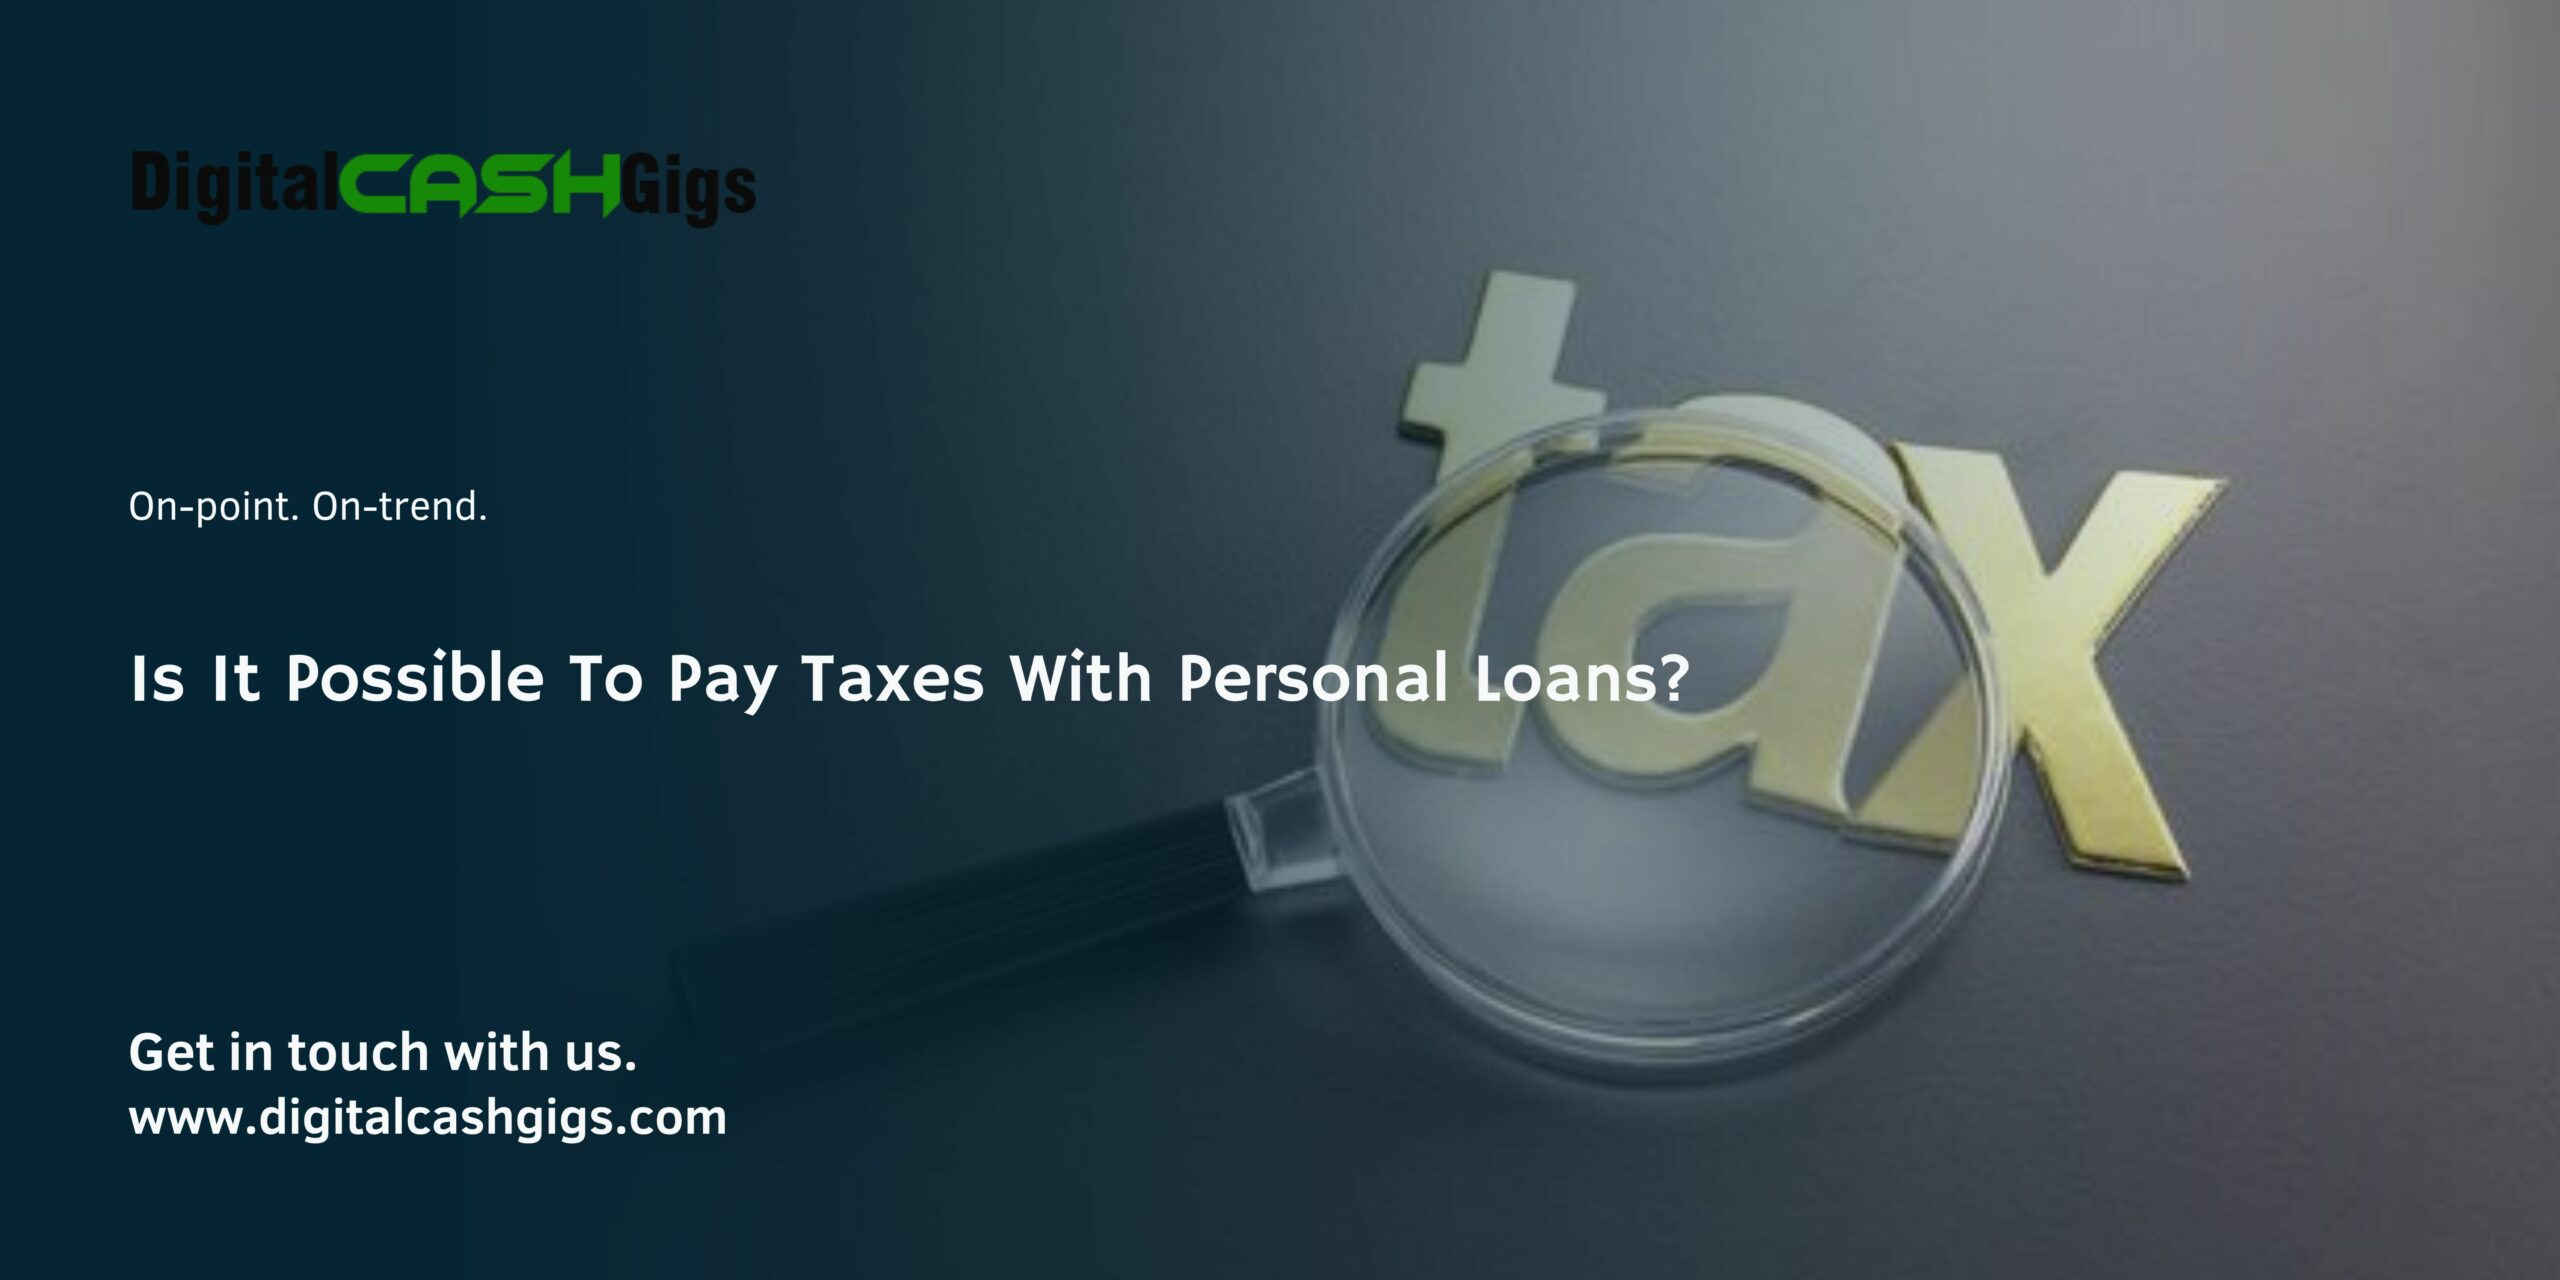 Is It Possible To Pay Taxes With Personal Loans?